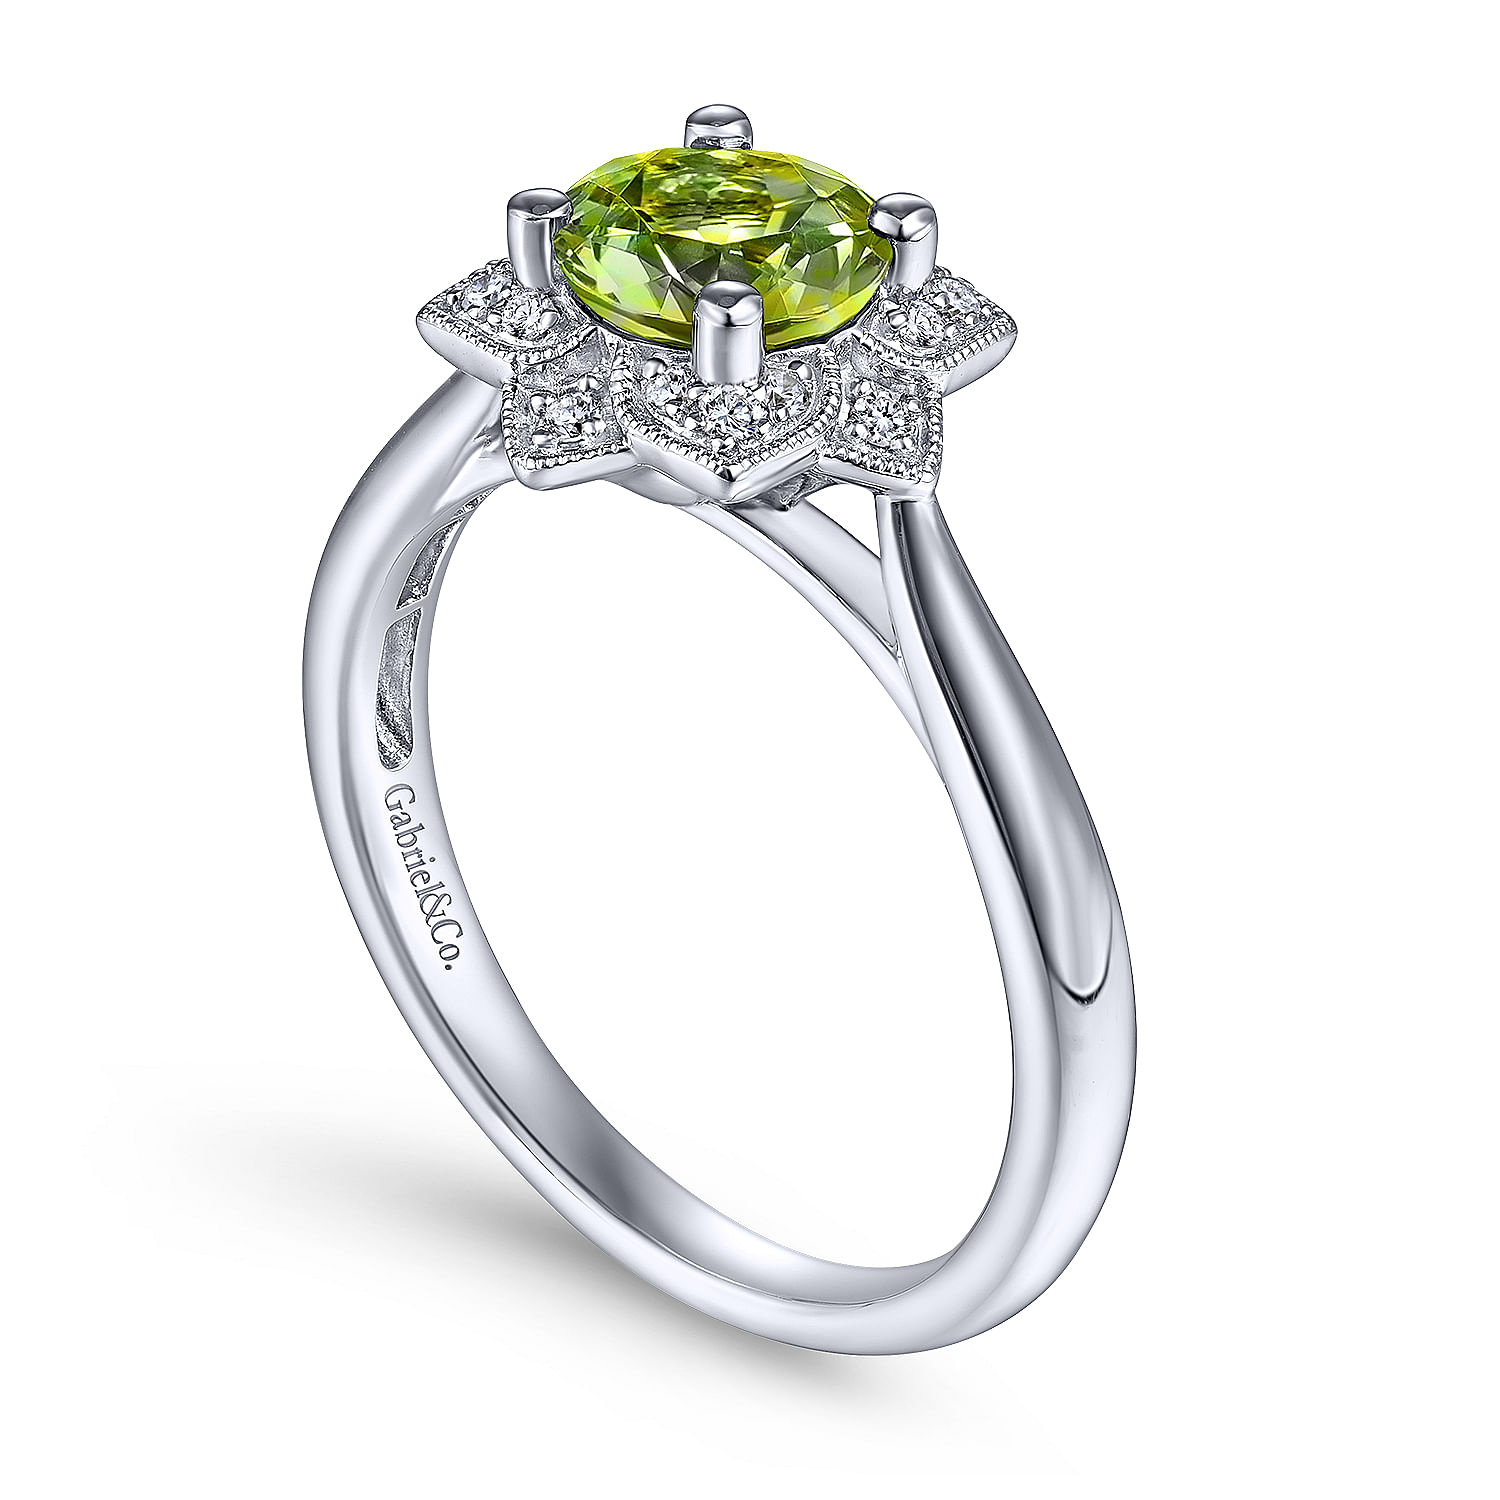 Vintage Inspired 14K White Gold Round Peridot and Floral Diamond Halo Ring